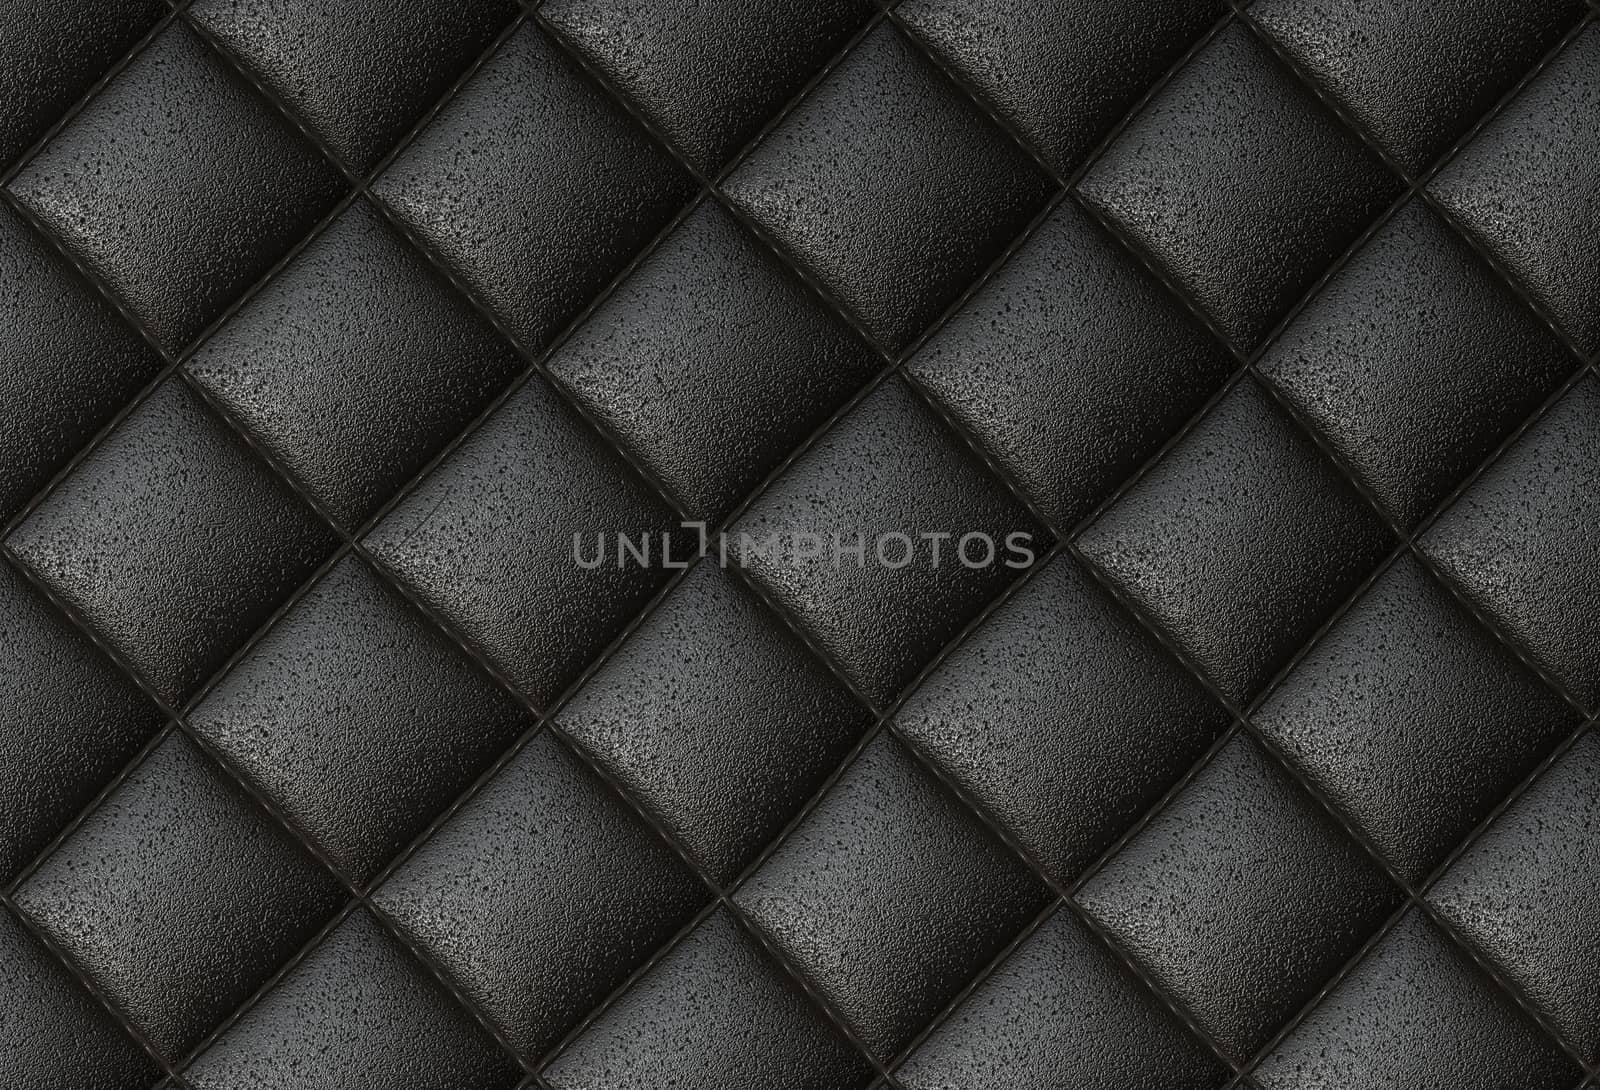 Black leather background or texture by Attila